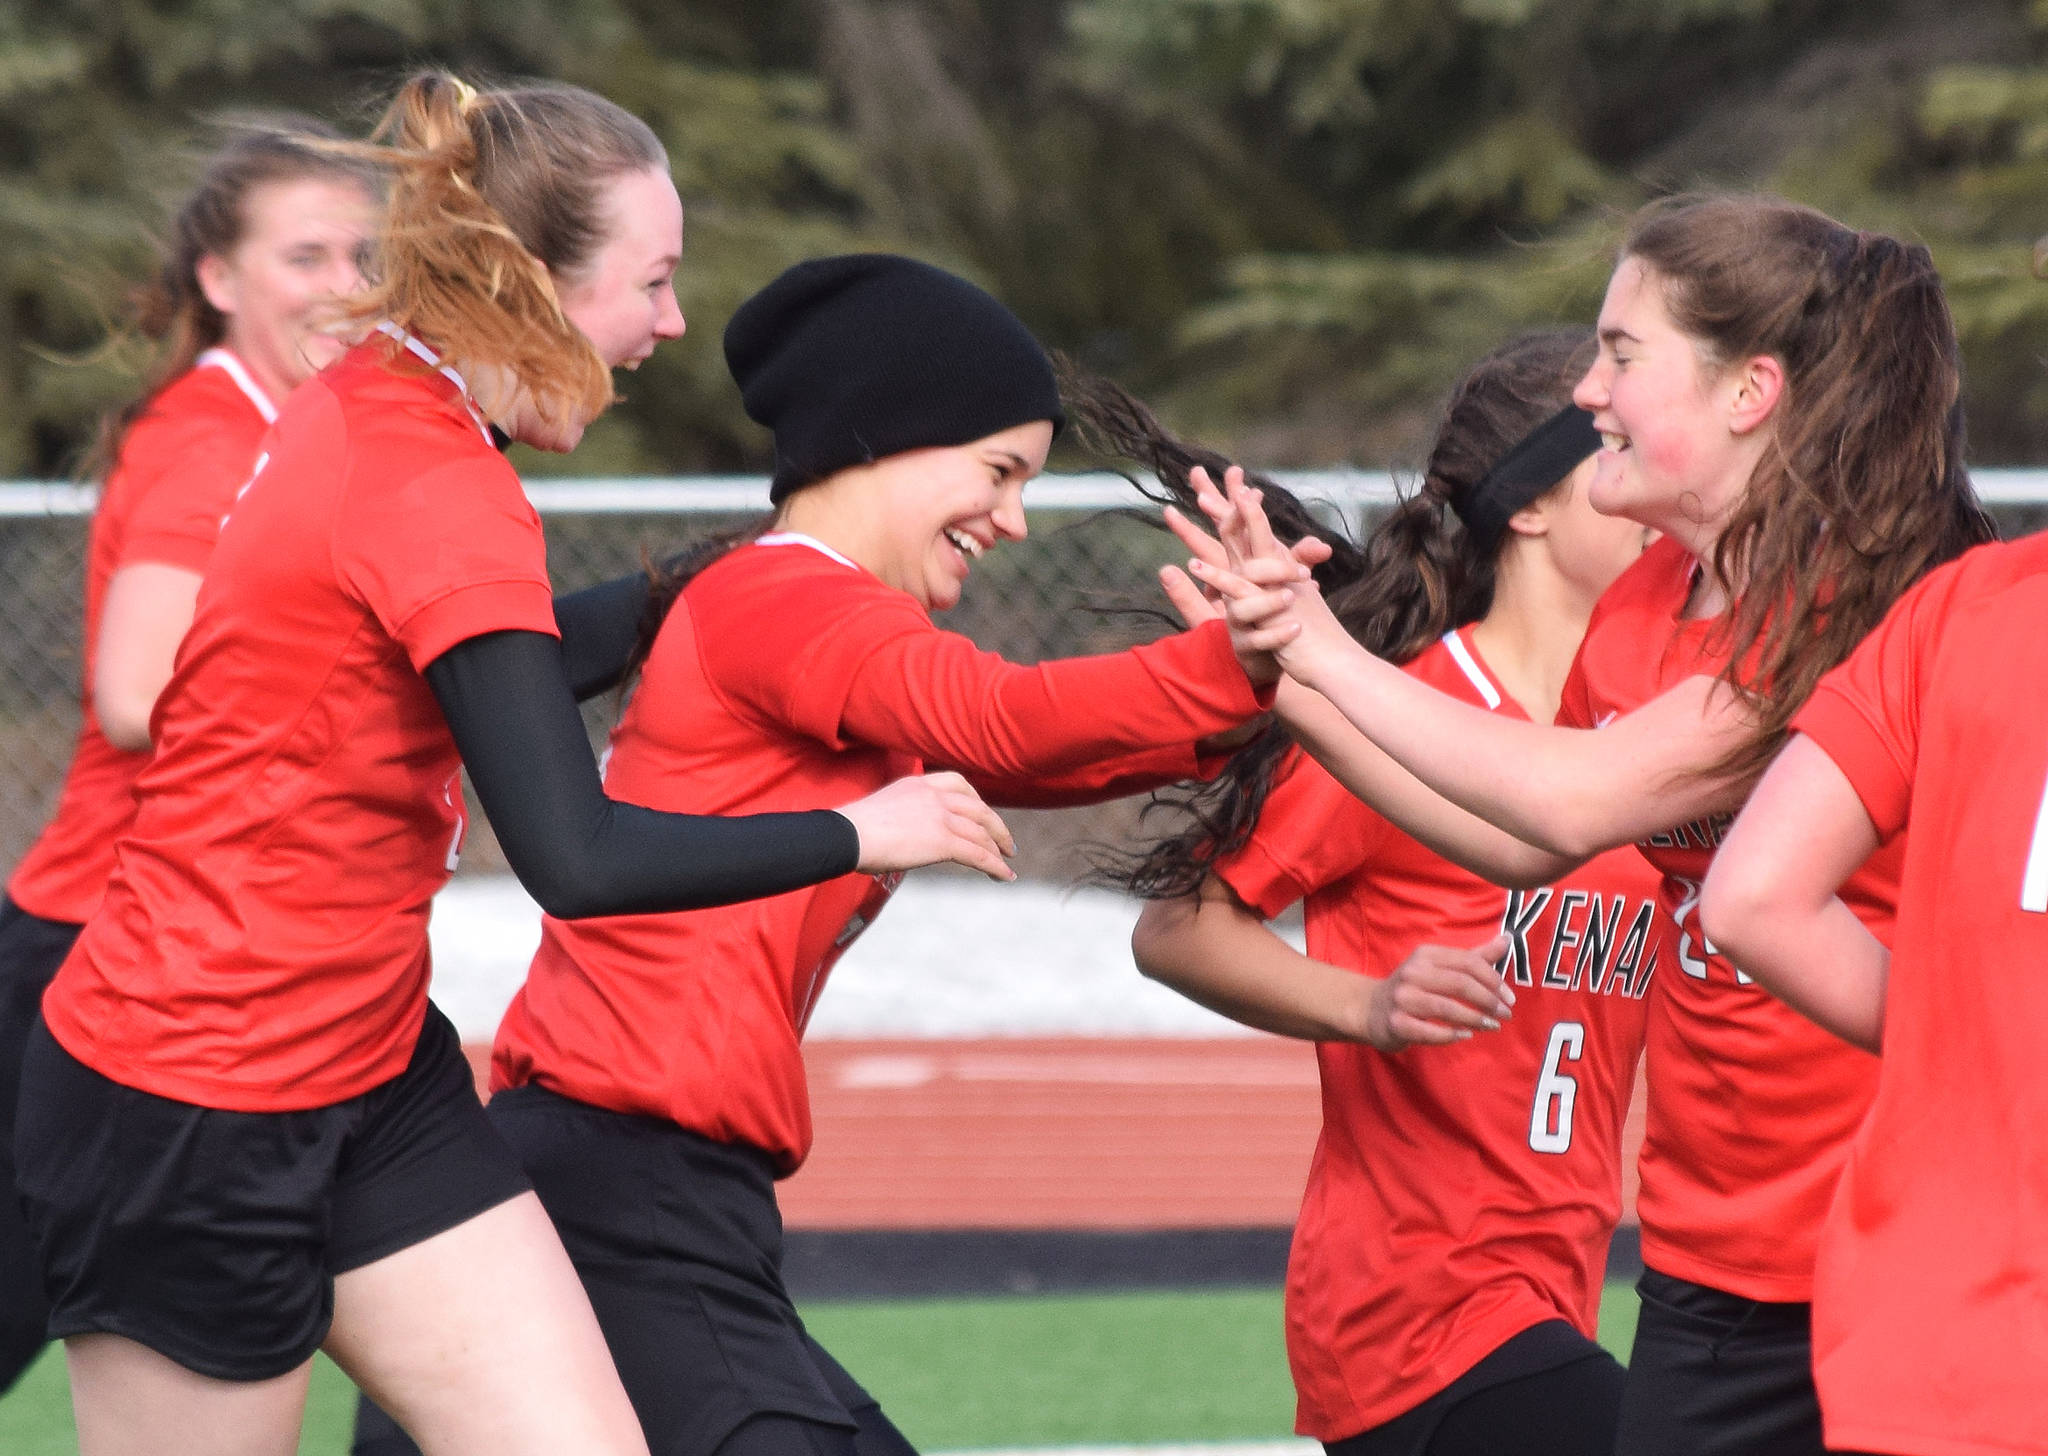 Kenai’s Taylor Pierce receives congratulations from teammates after scoring a goal Thursday against Nikiski in a Peninsula Conference clash at Kenai Central High School. (Photo by Joey Klecka/Peninsula Clarion)